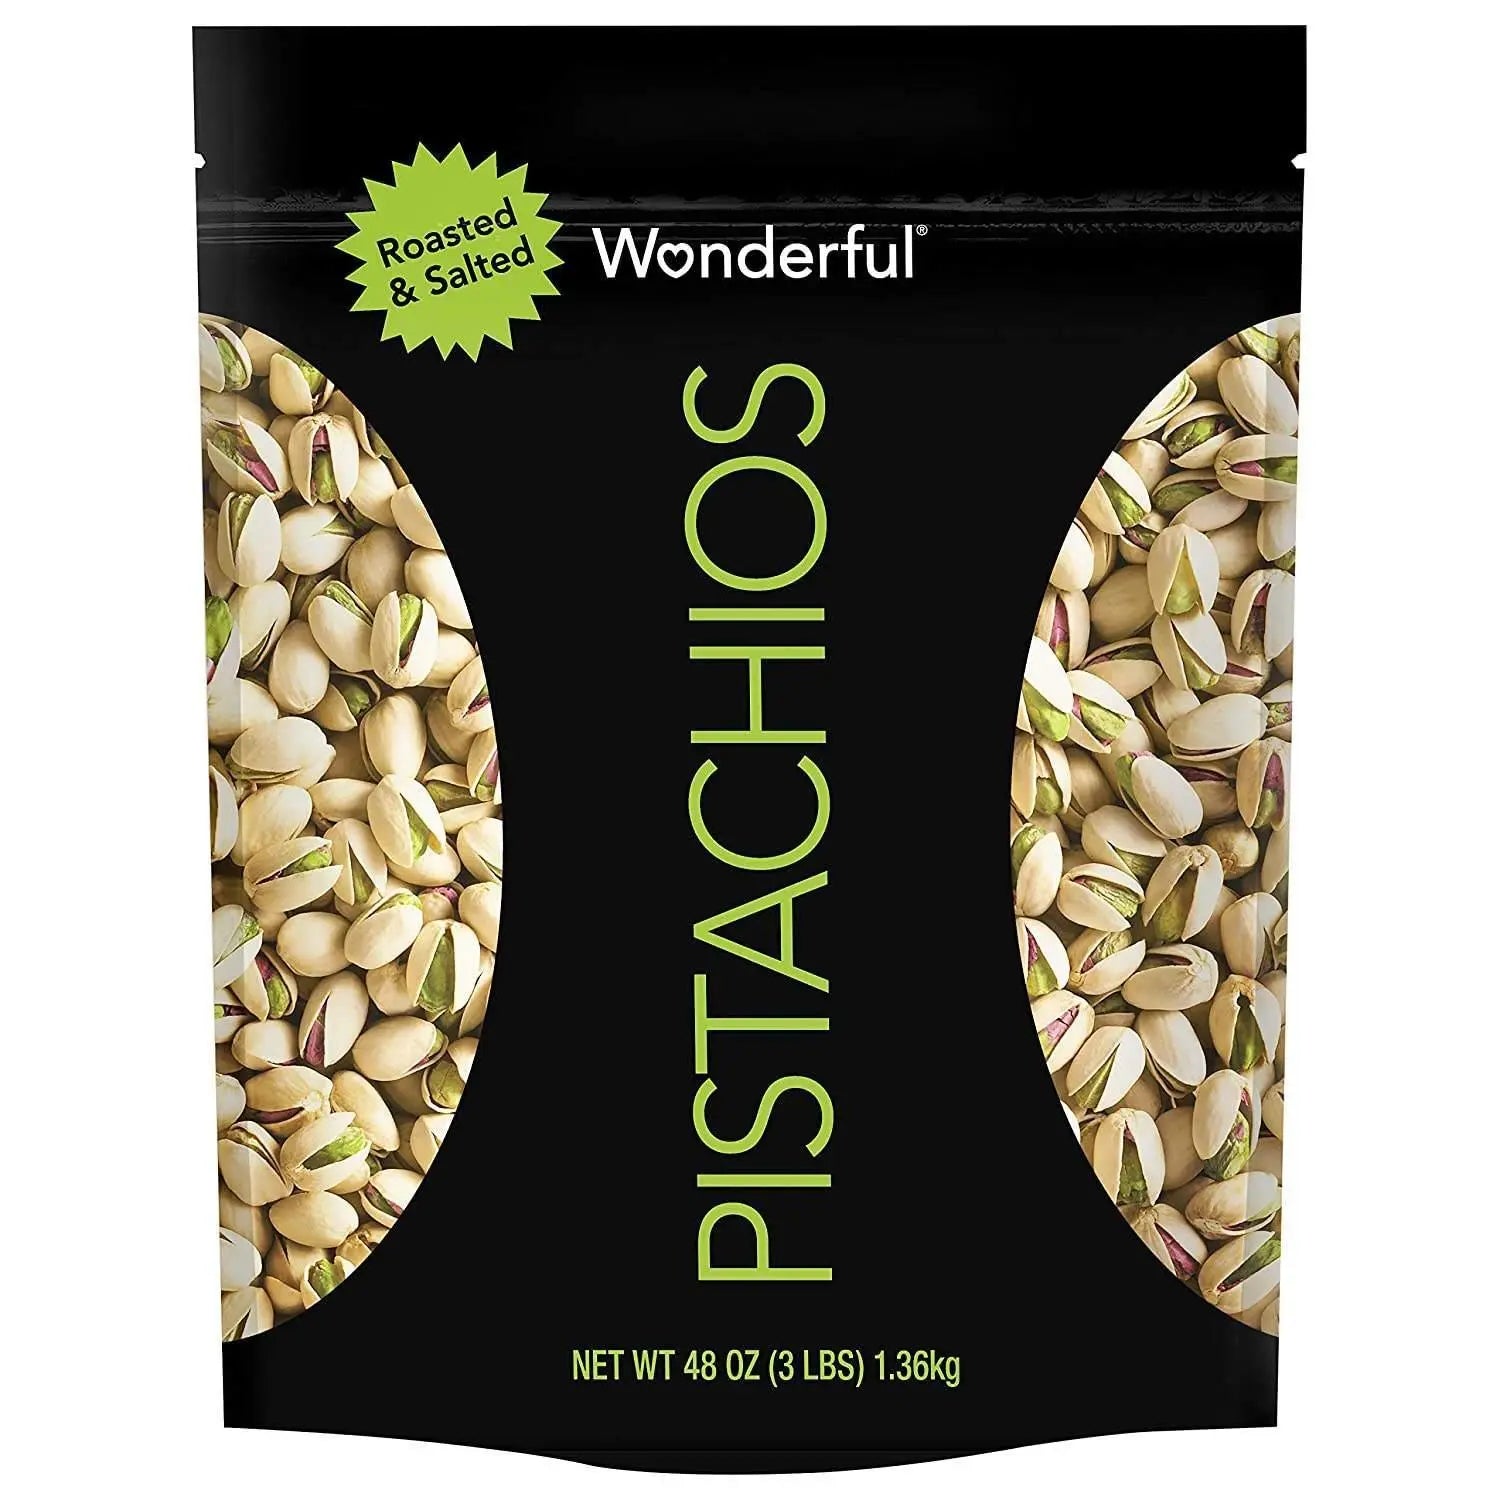 Wholesale prices with free shipping all over United States Wonderful Pistachios, Roasted and Salted - Steven Deals